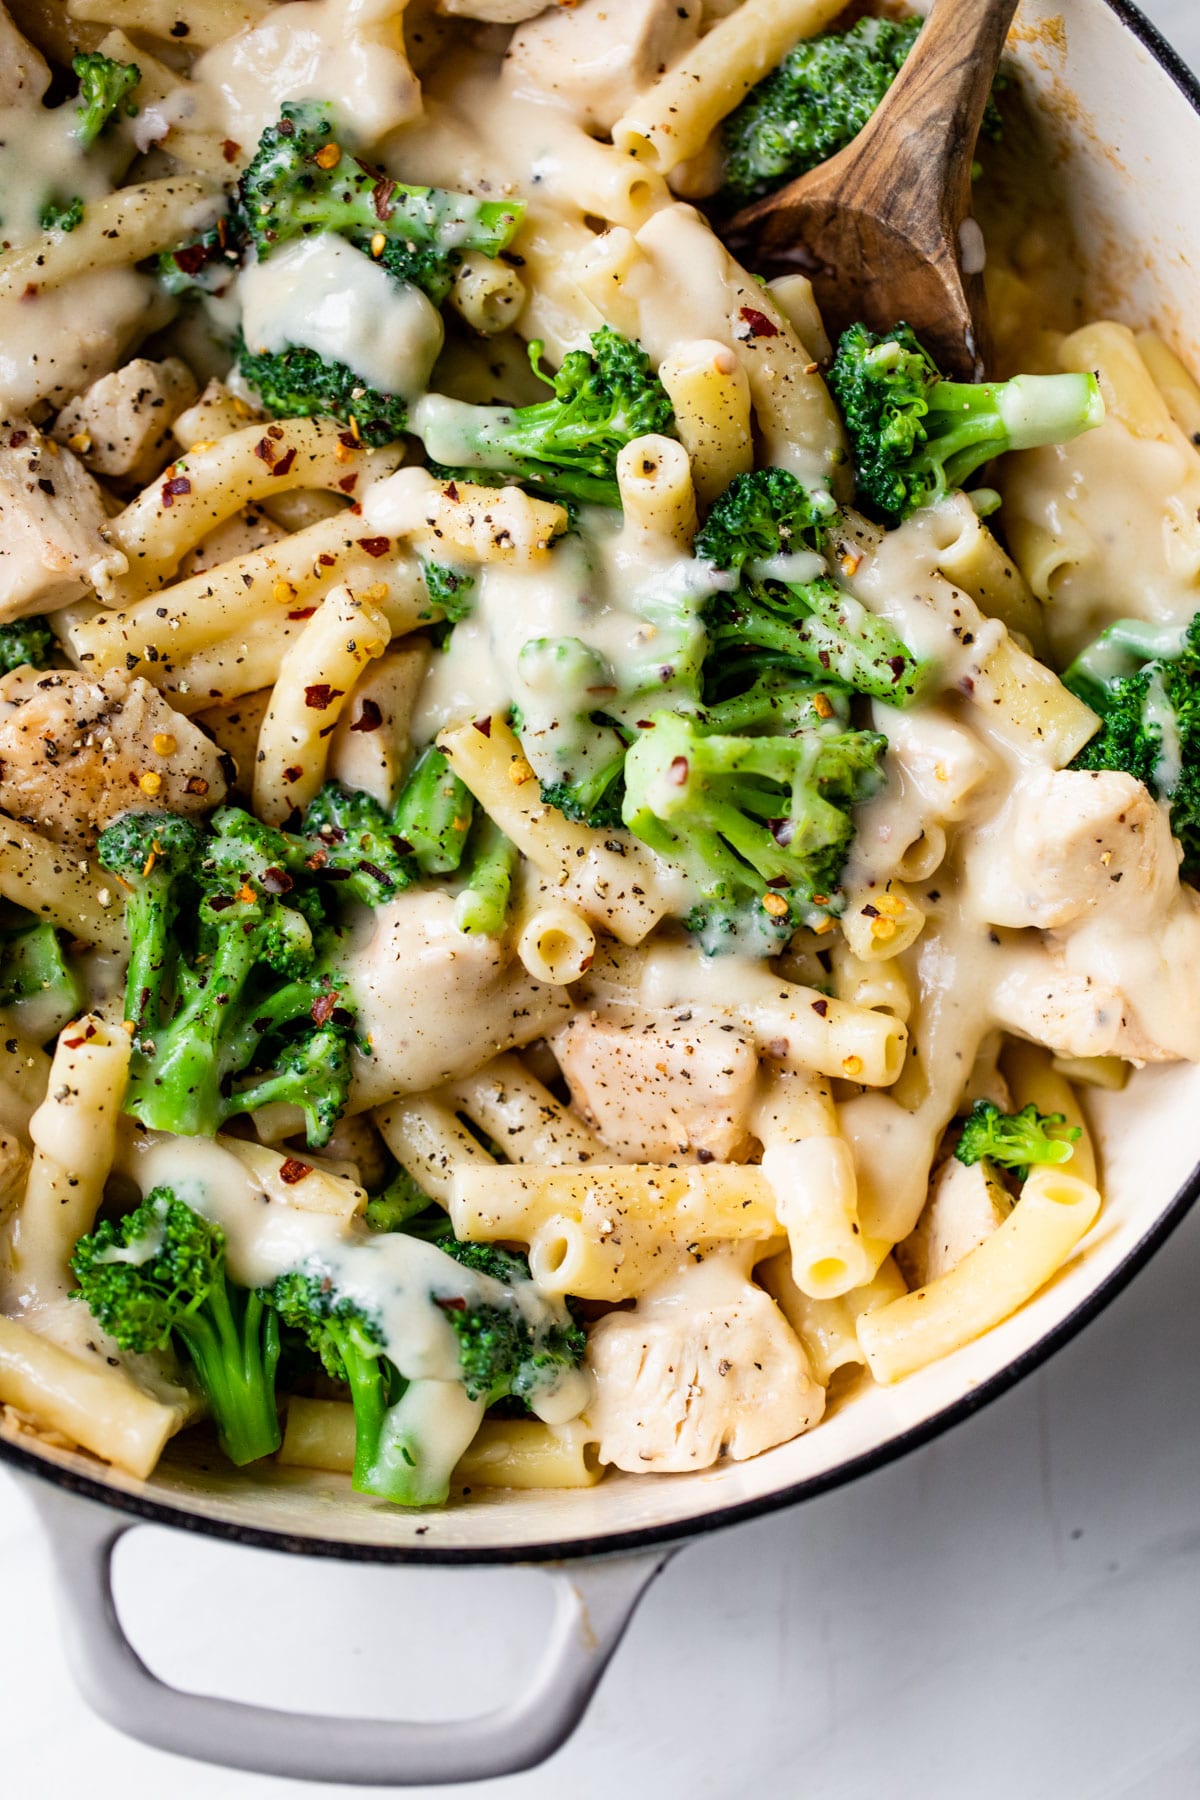 skillet filled with pasta, chicken, broccoli, and alfredo sauce